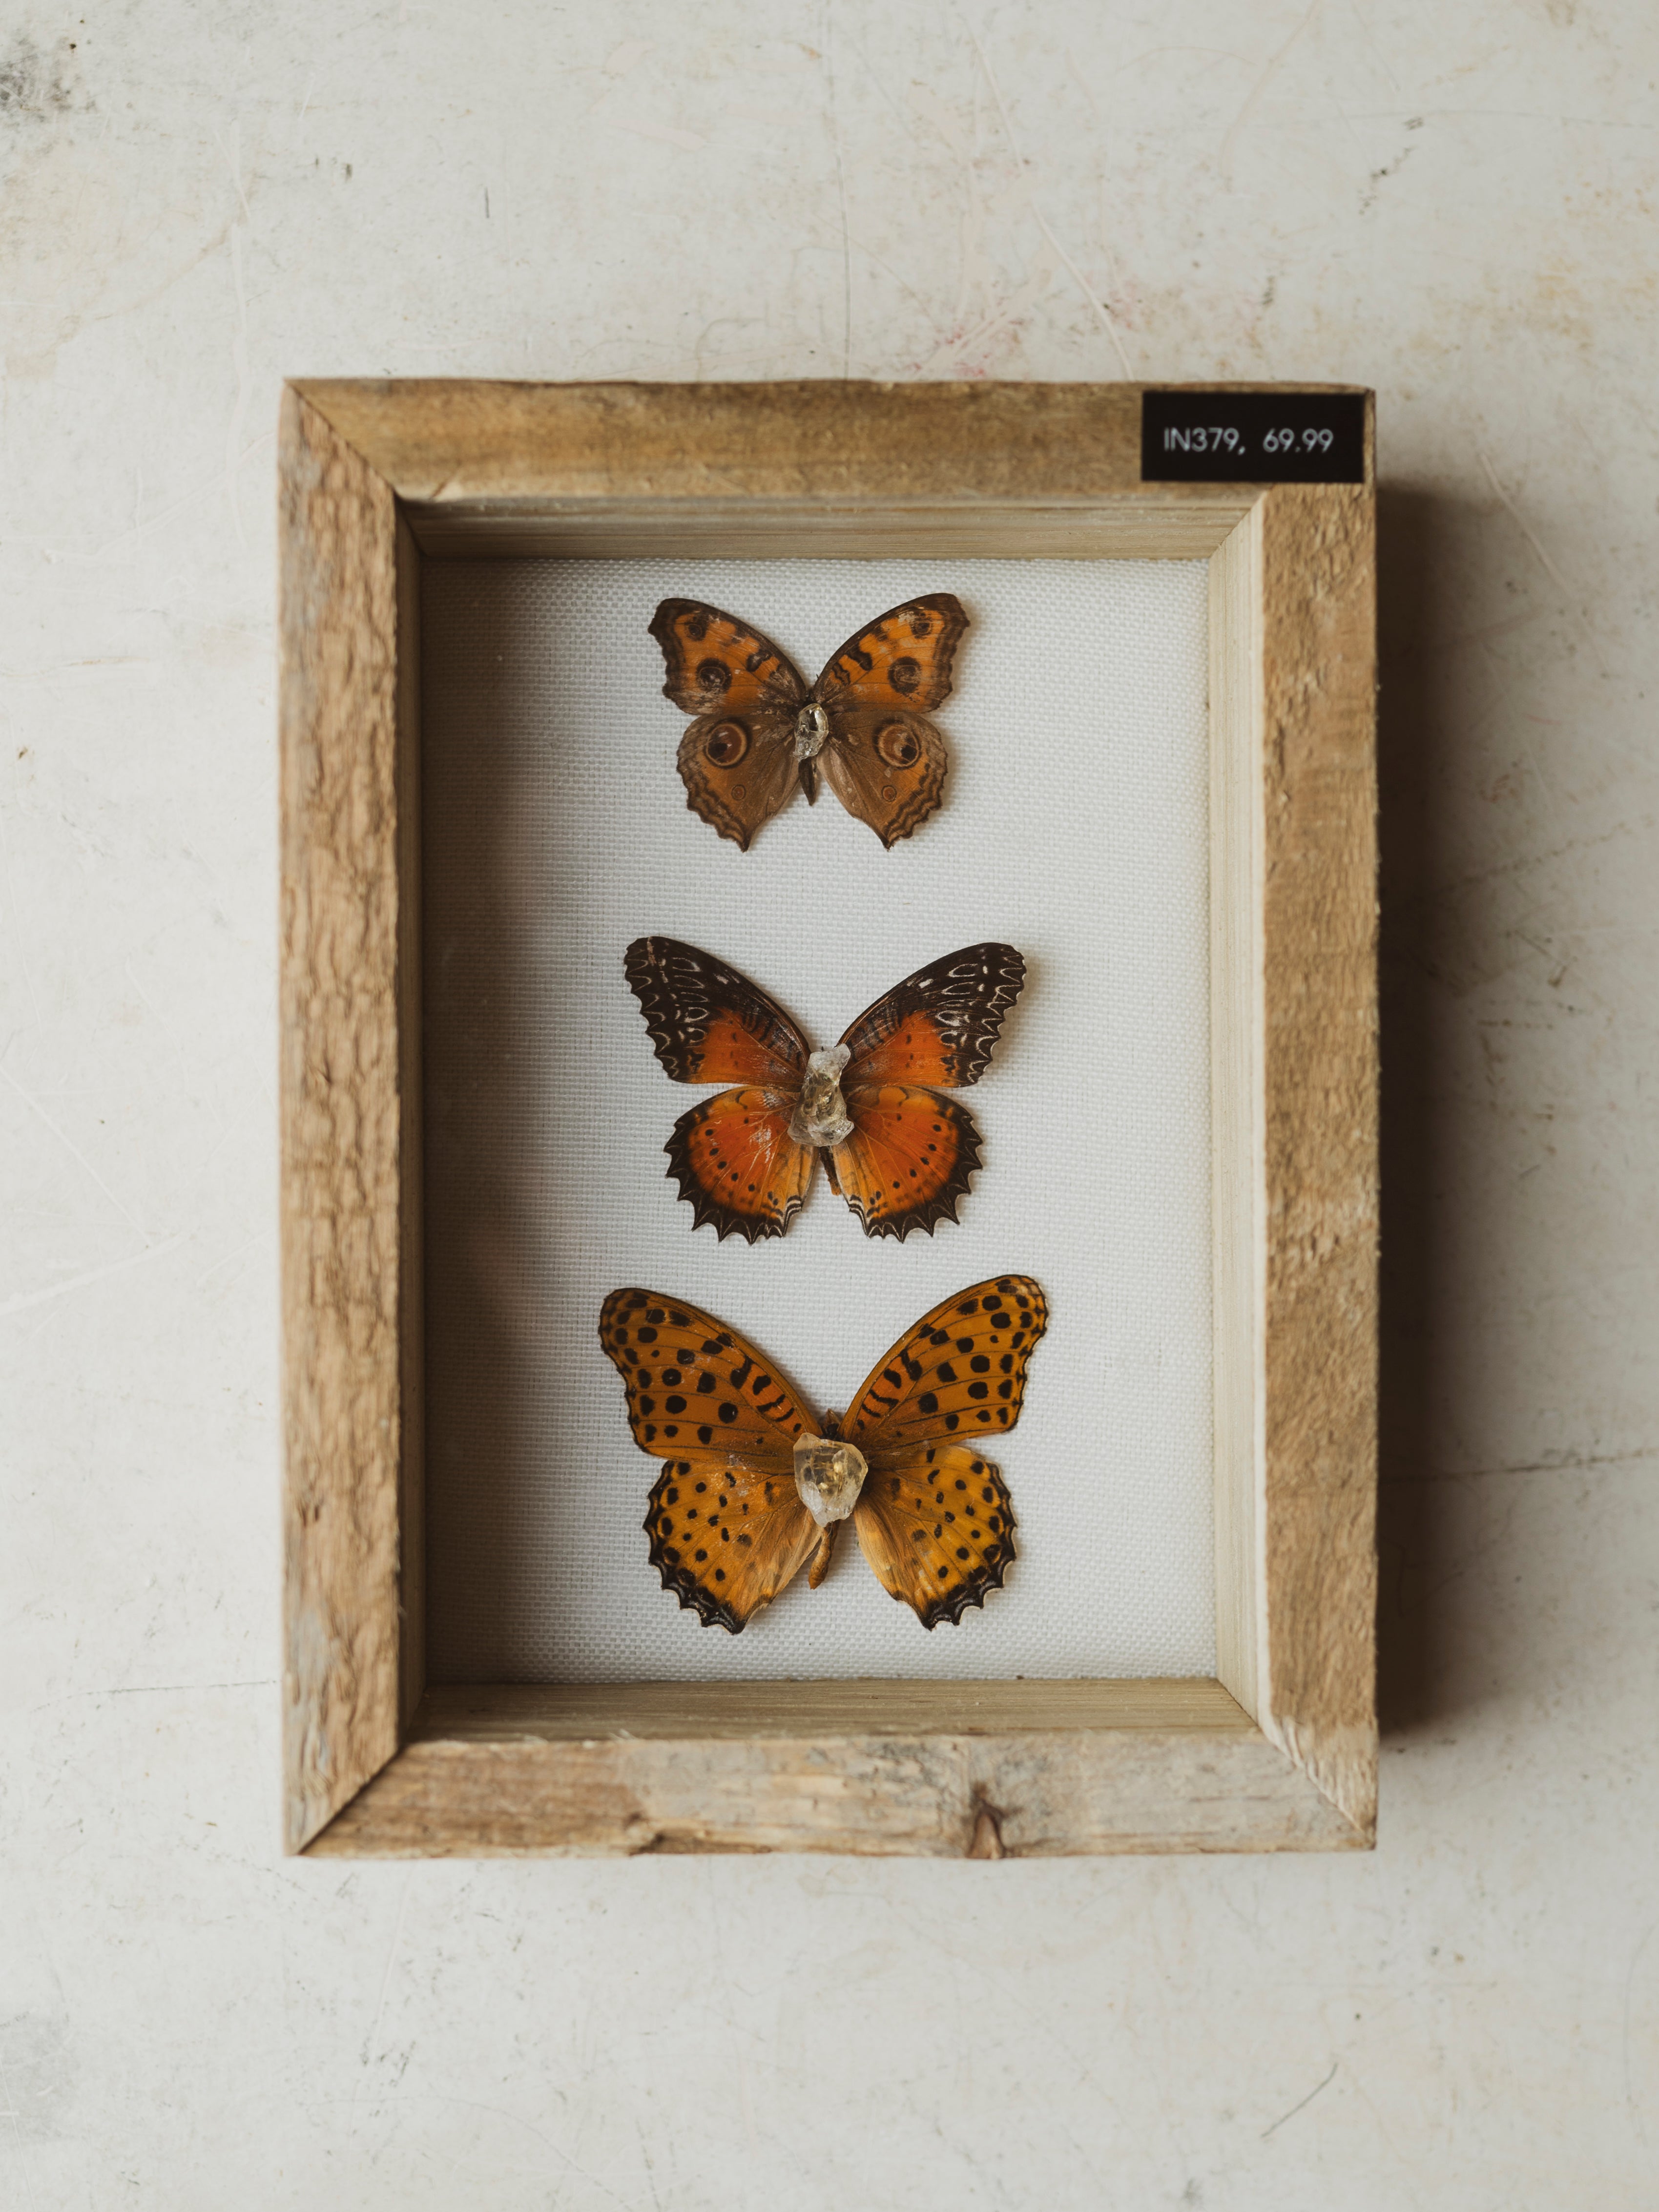 7.75" Framed Butterfly Collection, IN379